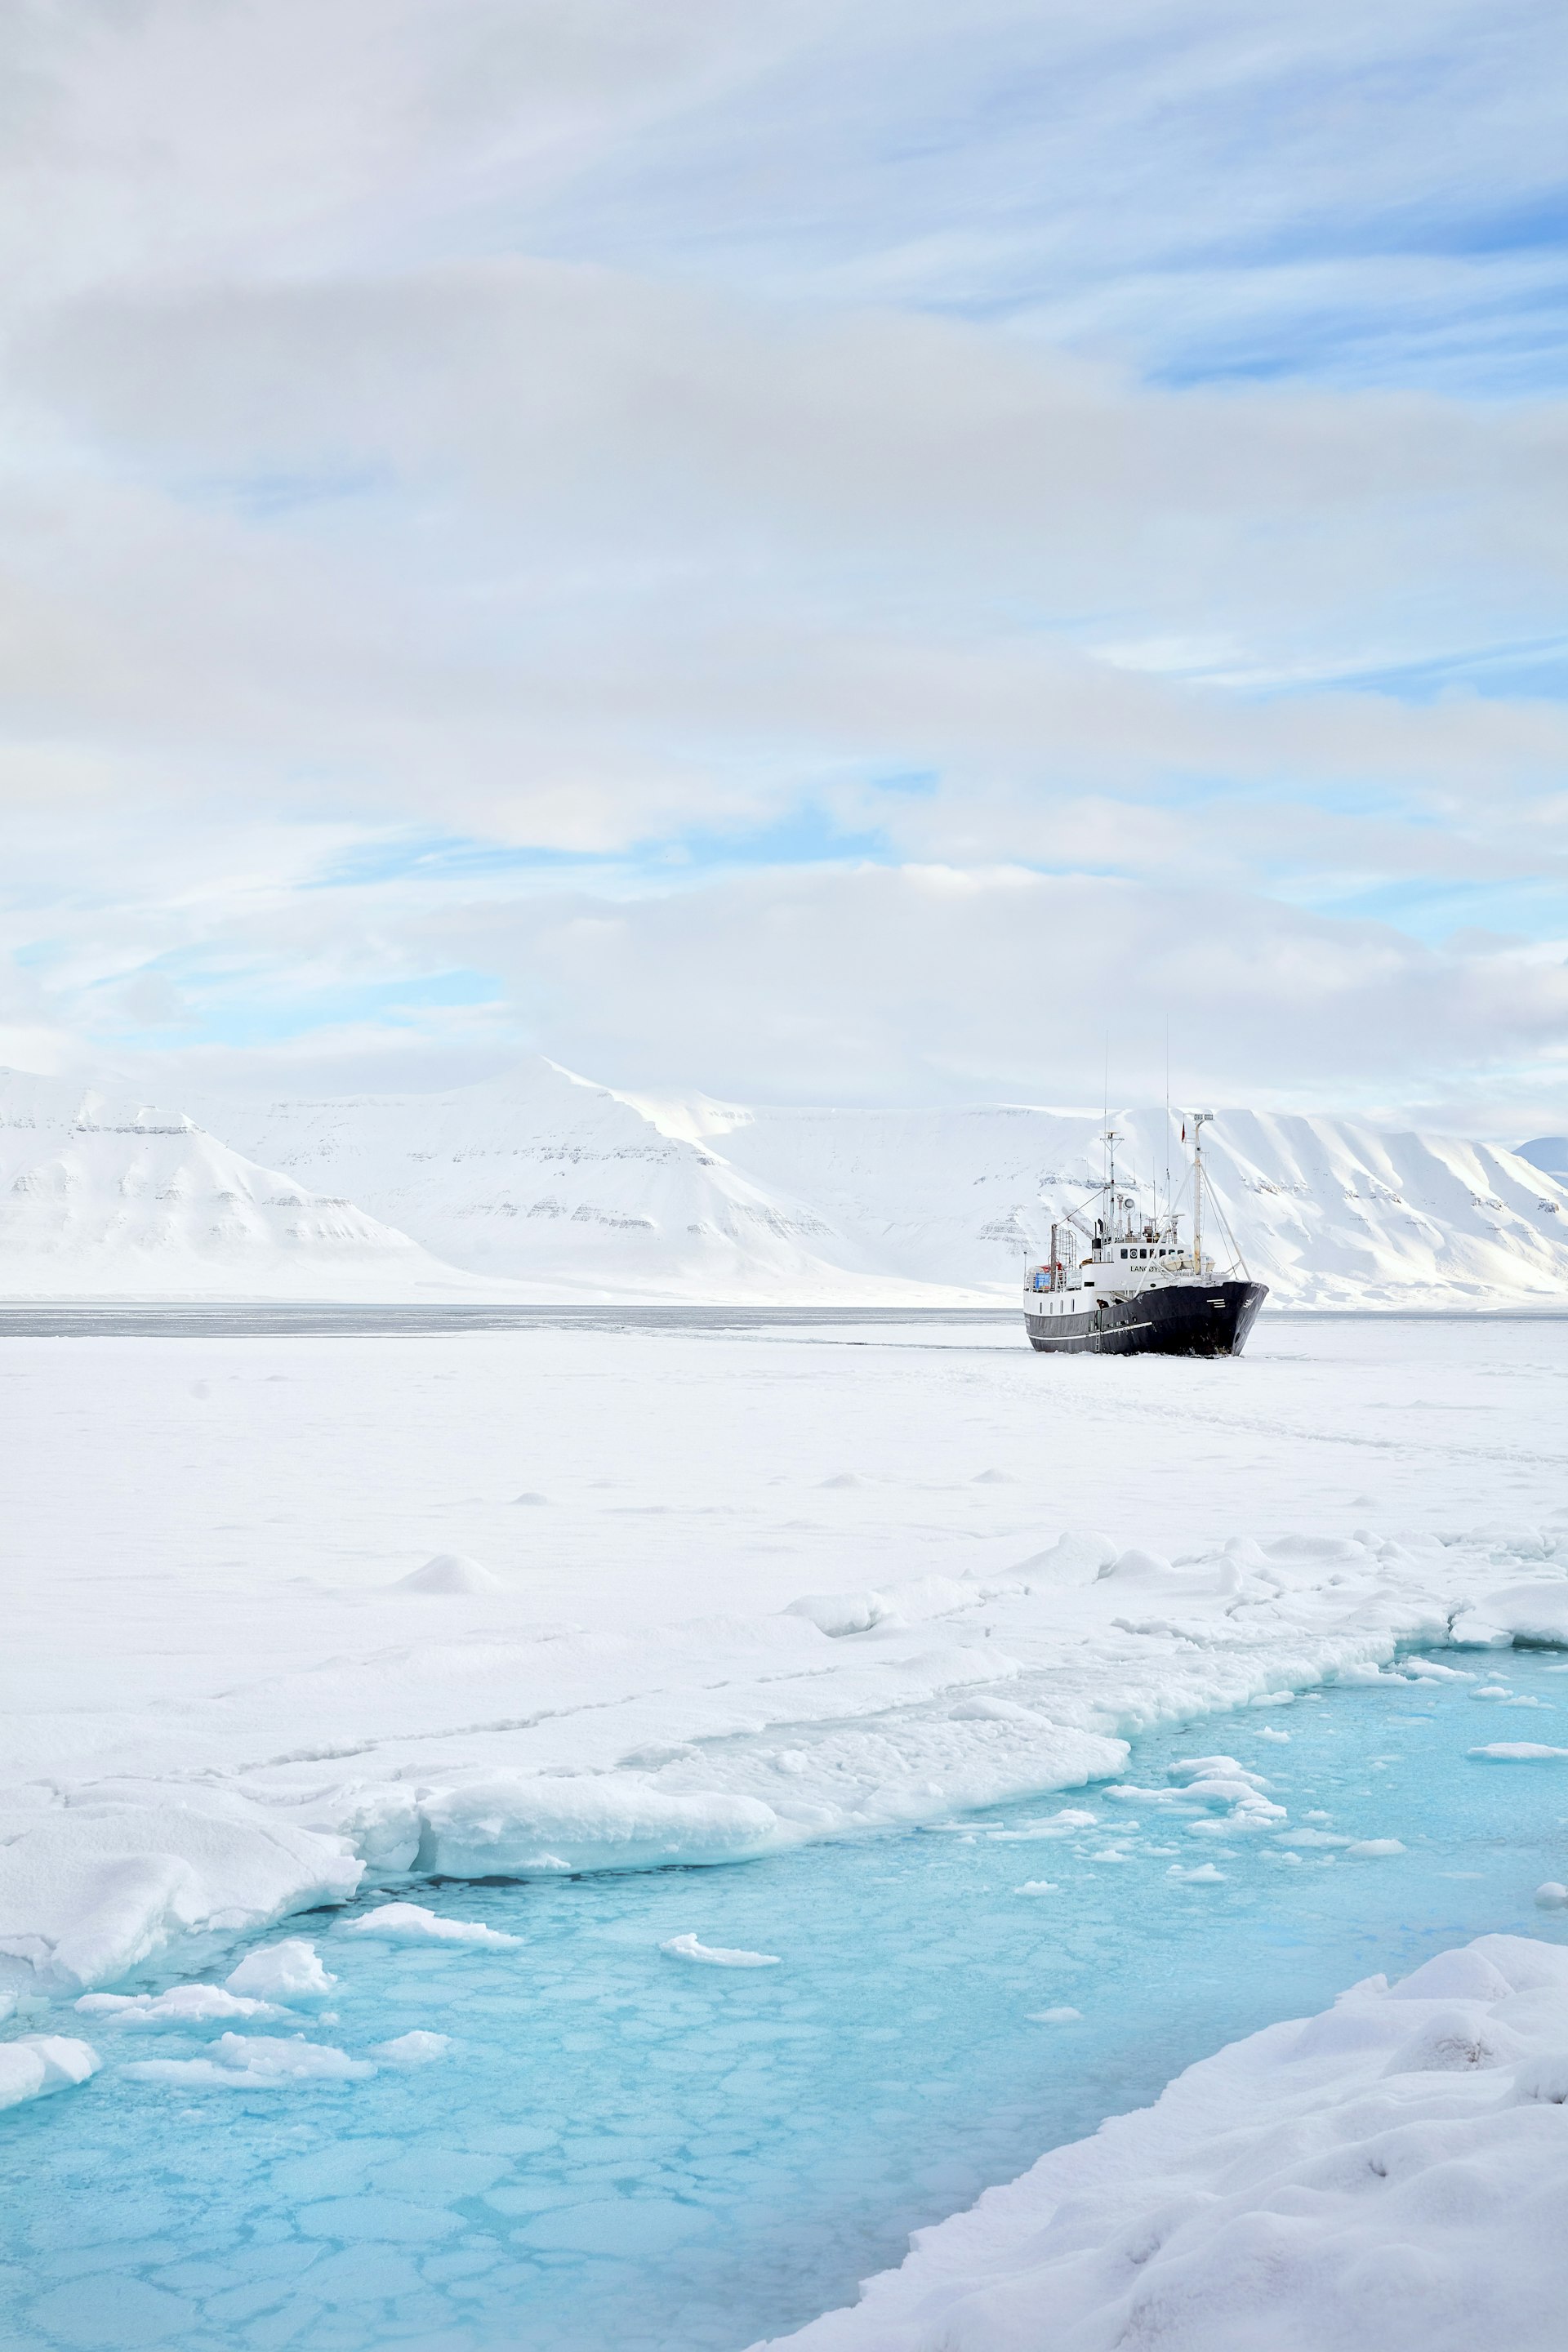 A boat surrounded by ice and snowy mountains